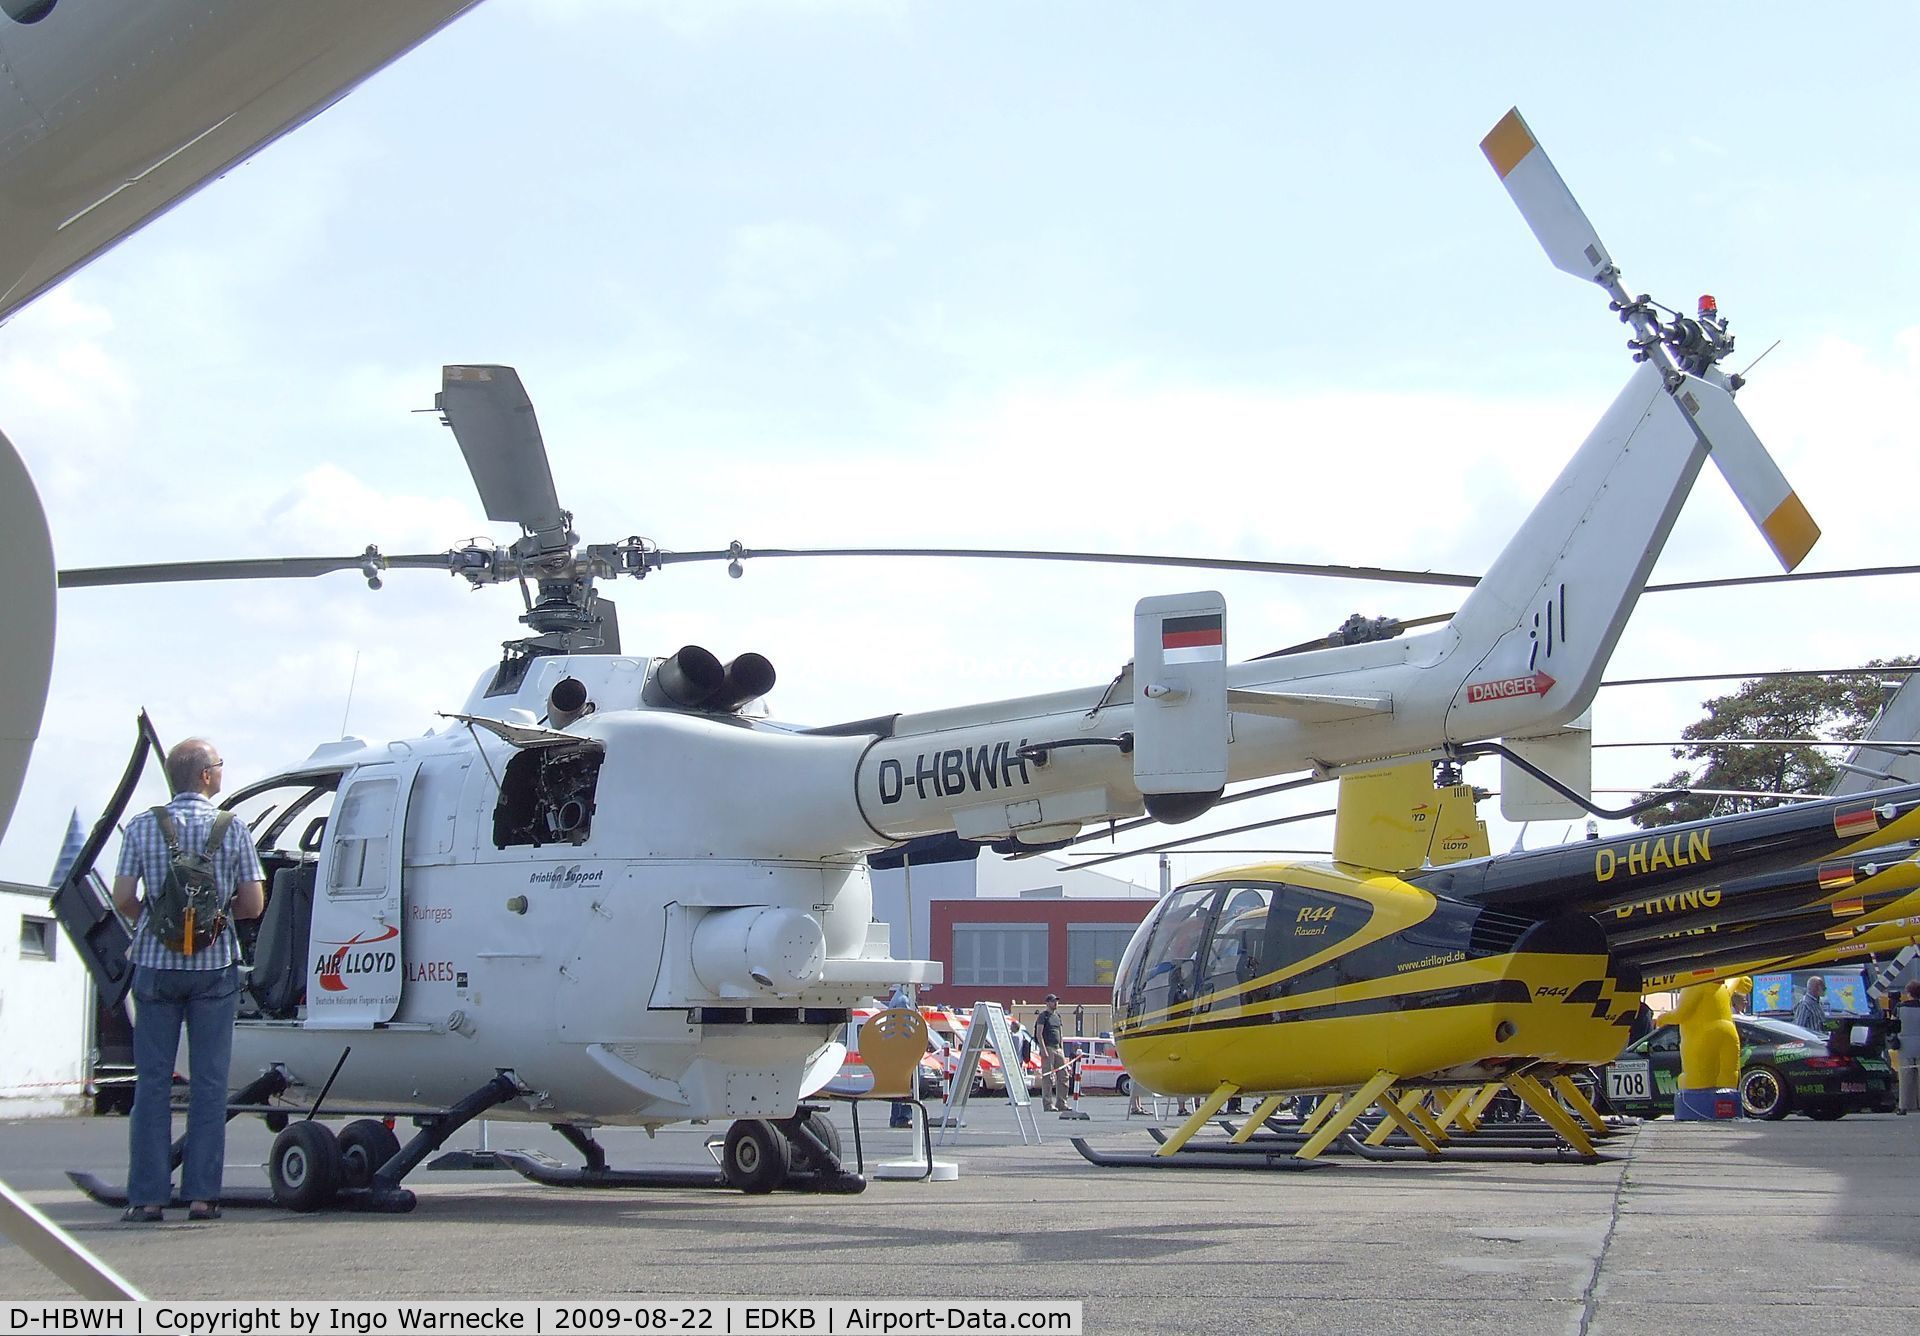 D-HBWH, 1997 MBB Bo-105CBS-5 C/N S-929, MBB Bo 105CBS-5 of Air Lloyd (equipped with laser sensor to monitor gas pipelines for any traces of escaping methane) at the Bonn-Hangelar centennial jubilee airshow